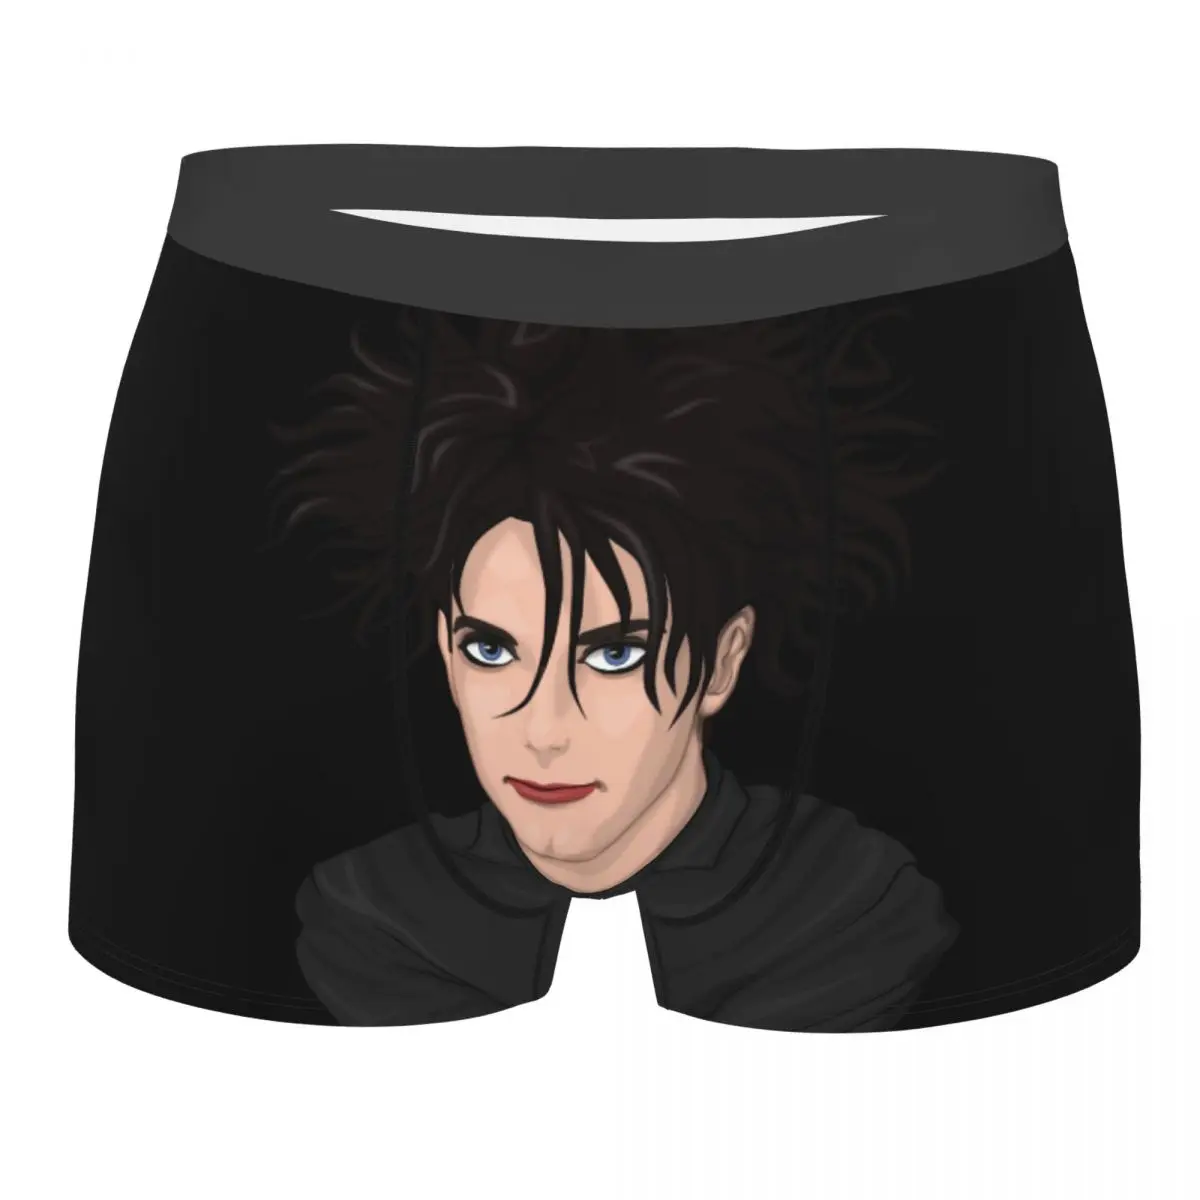 The Cure Robert Smith Men Boxer Briefs Underpants Highly Breathable High Quality Gift Idea